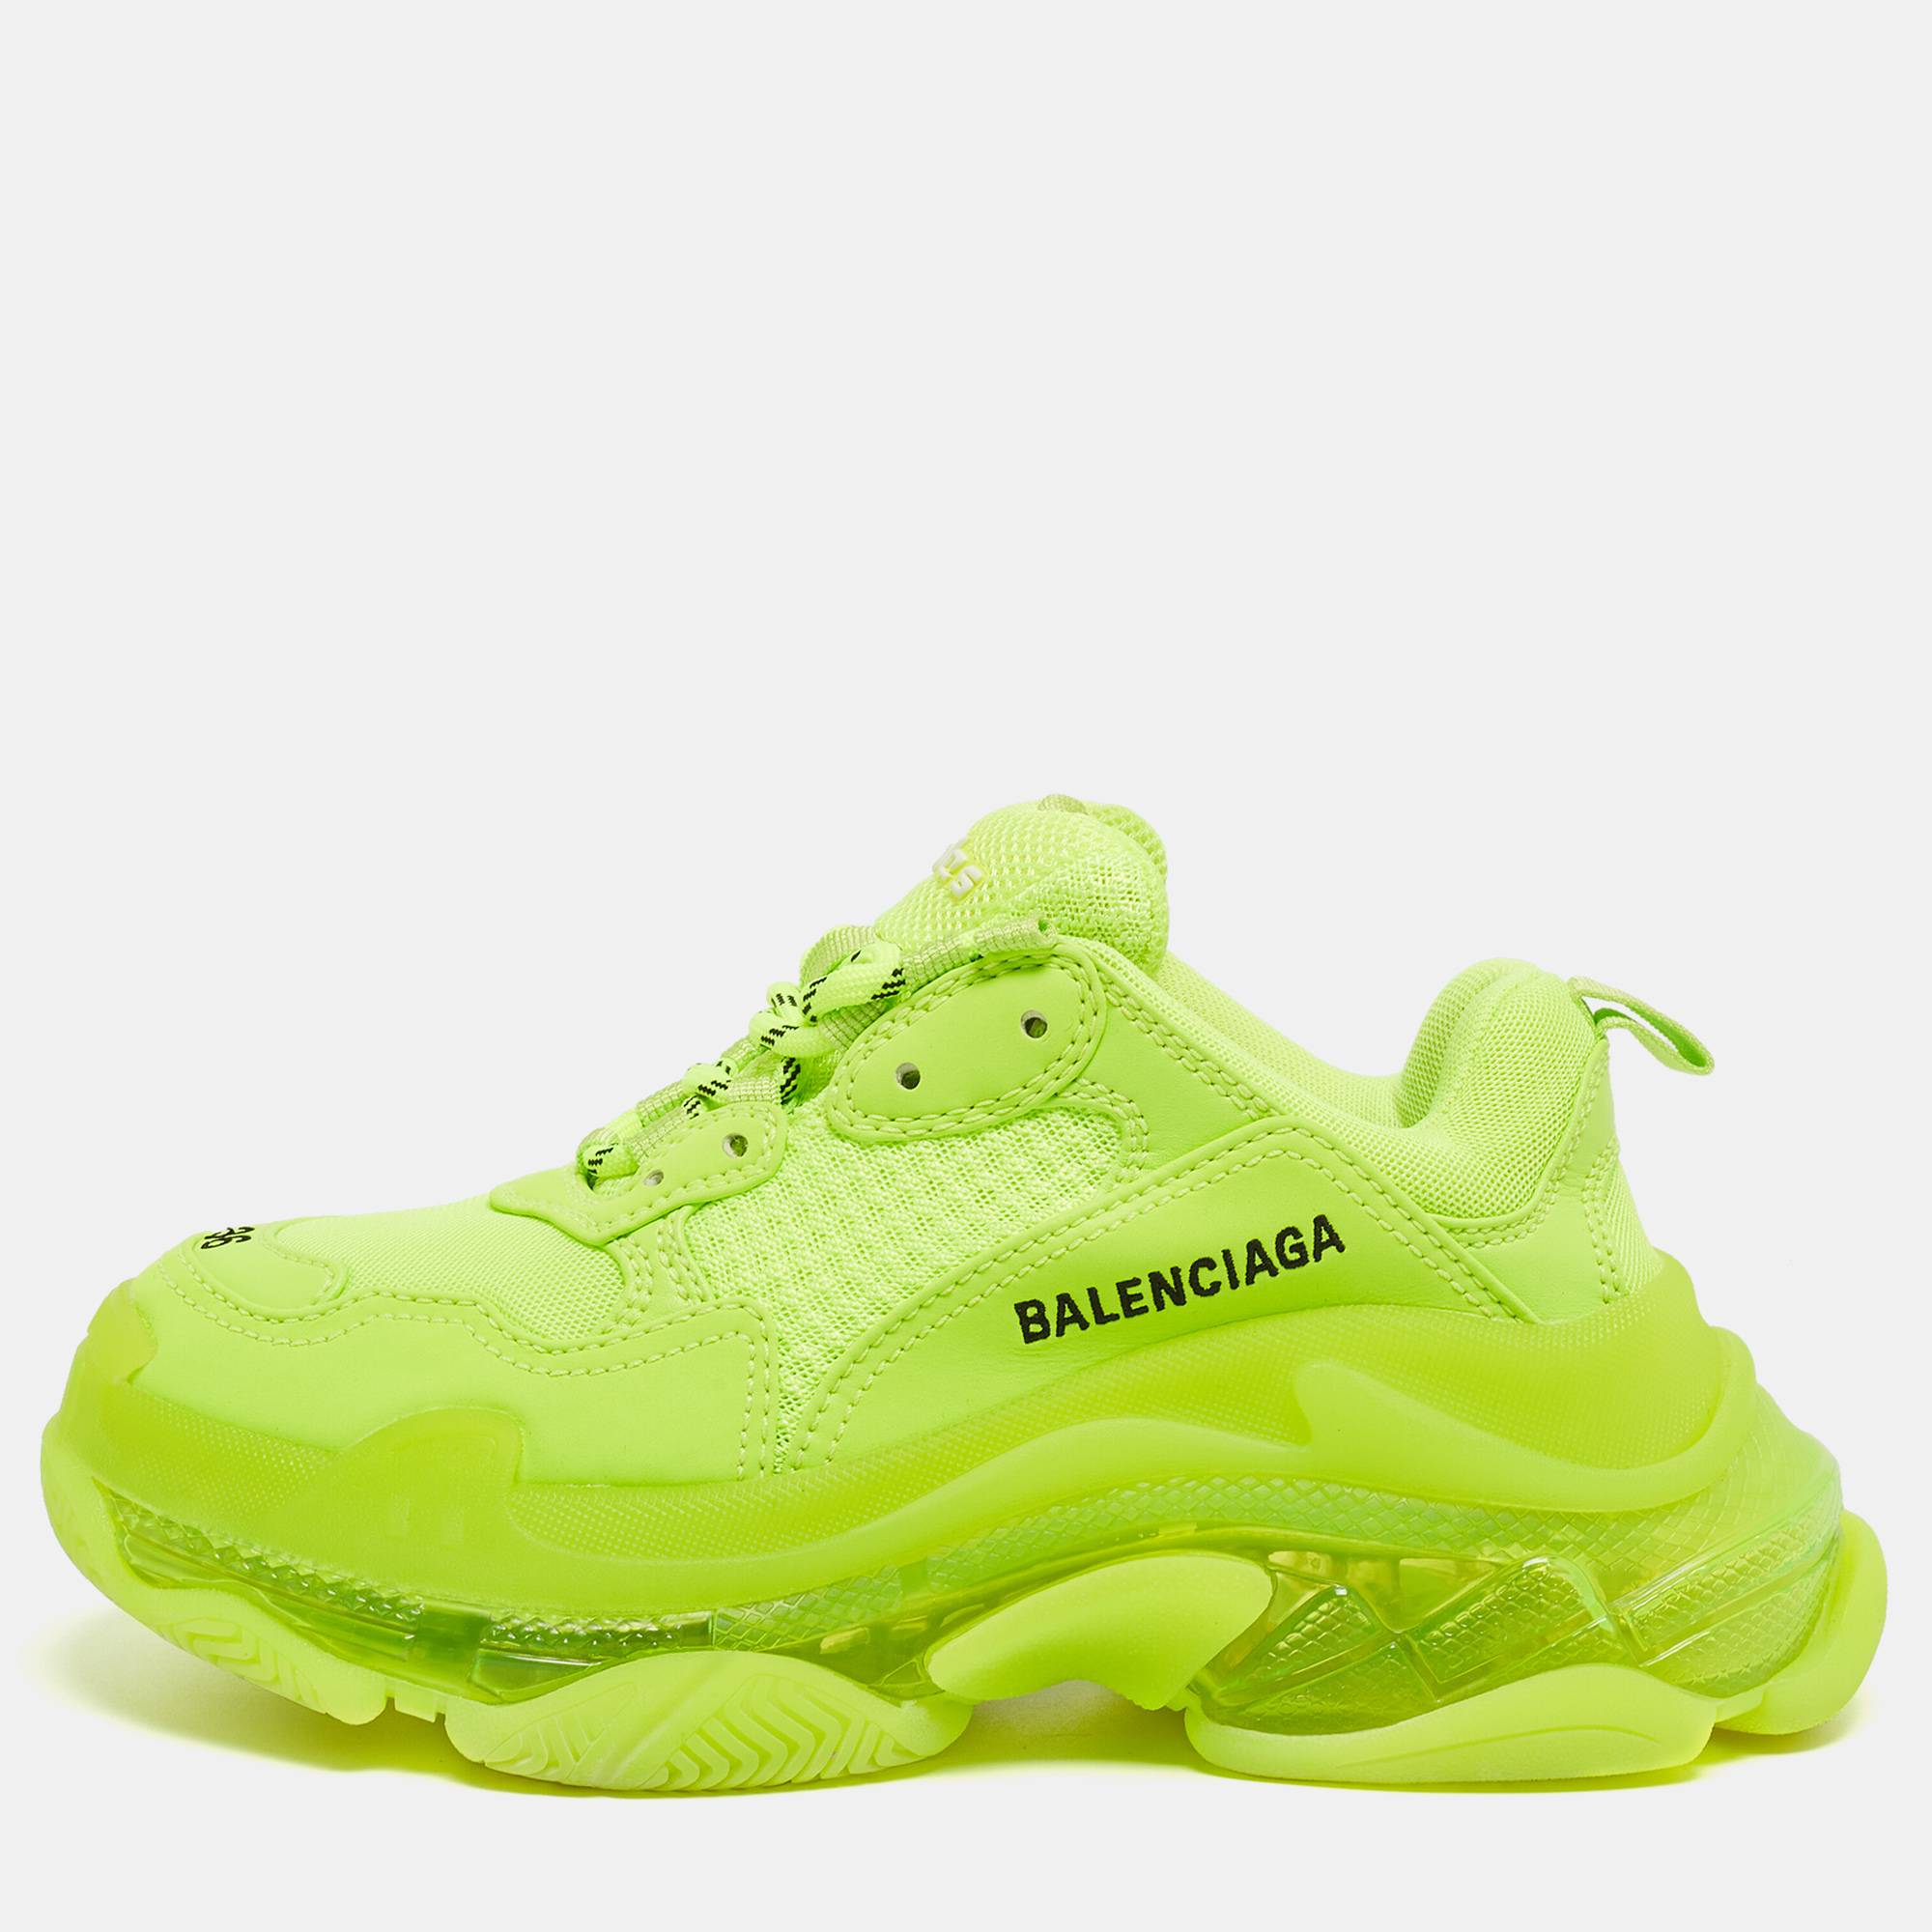 Balenciaga Green Nubuck Leather And Mesh Triple S Clear  Sneakers Size 36